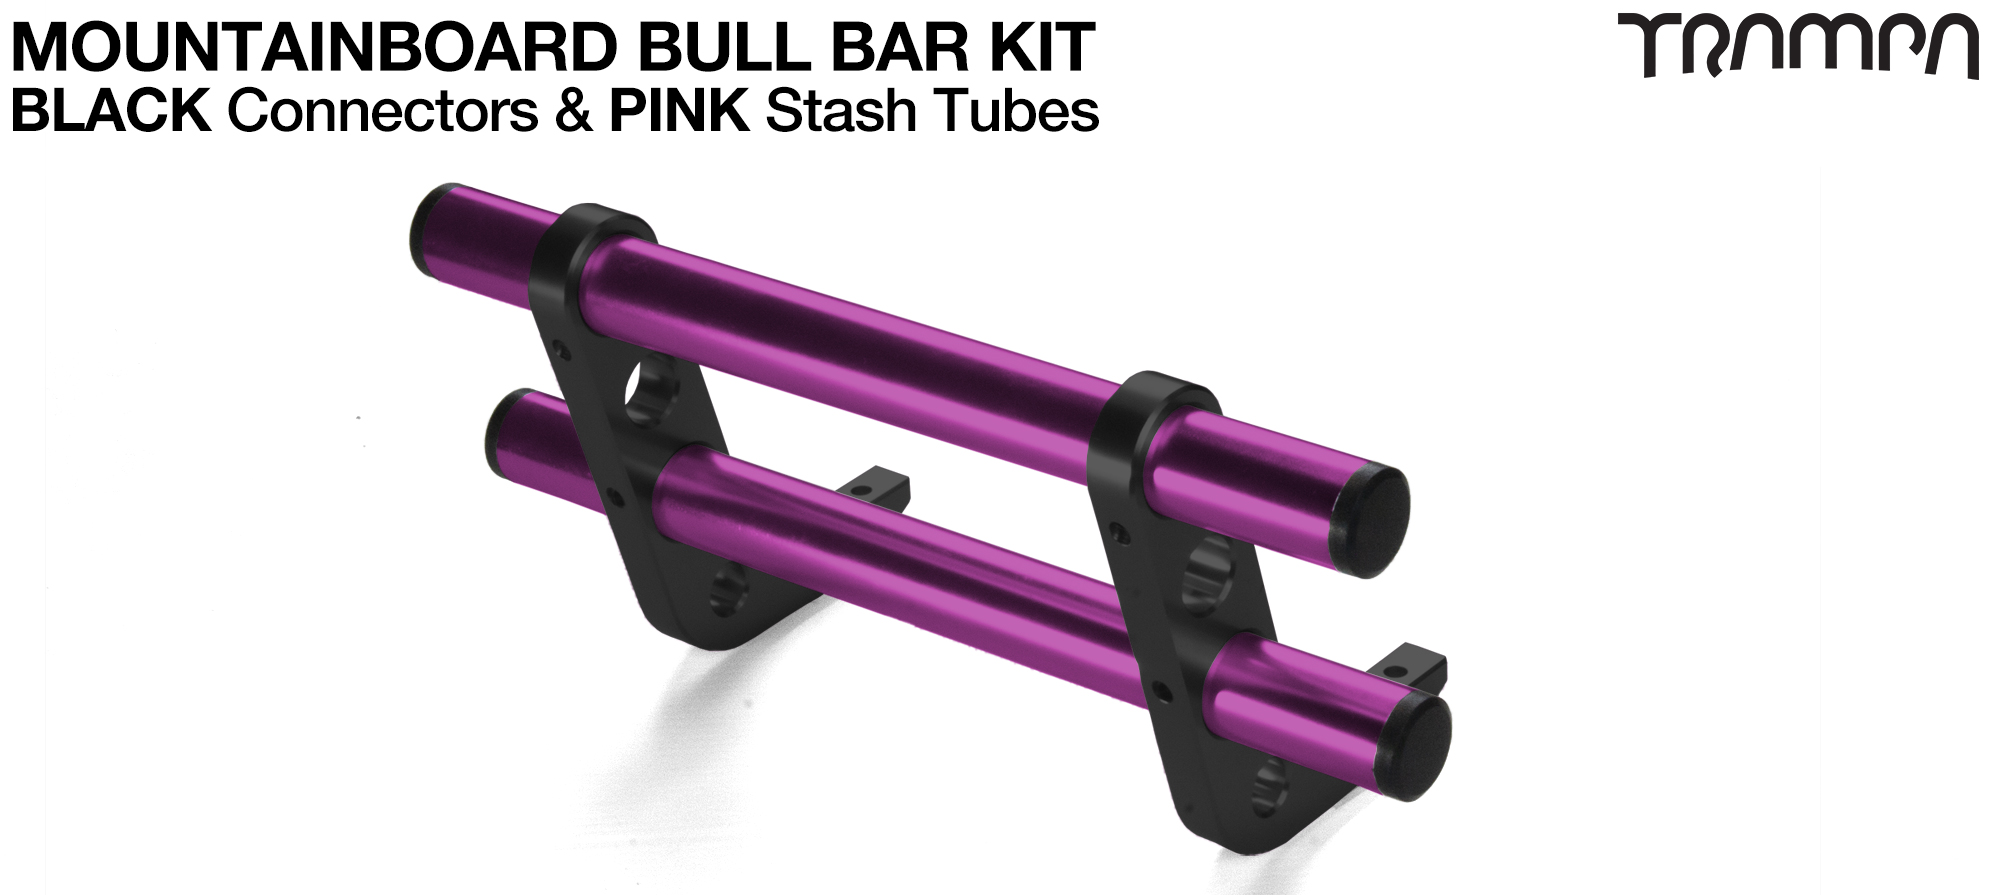 BLACK Uprights  &PINK Crossbar BULL BARS for MOUNTAINBOARDS using T6 Heat Treated CNC'd AluminIum Clamps, Hollow Aluminium Stash Tubes with Rubber end bungs 